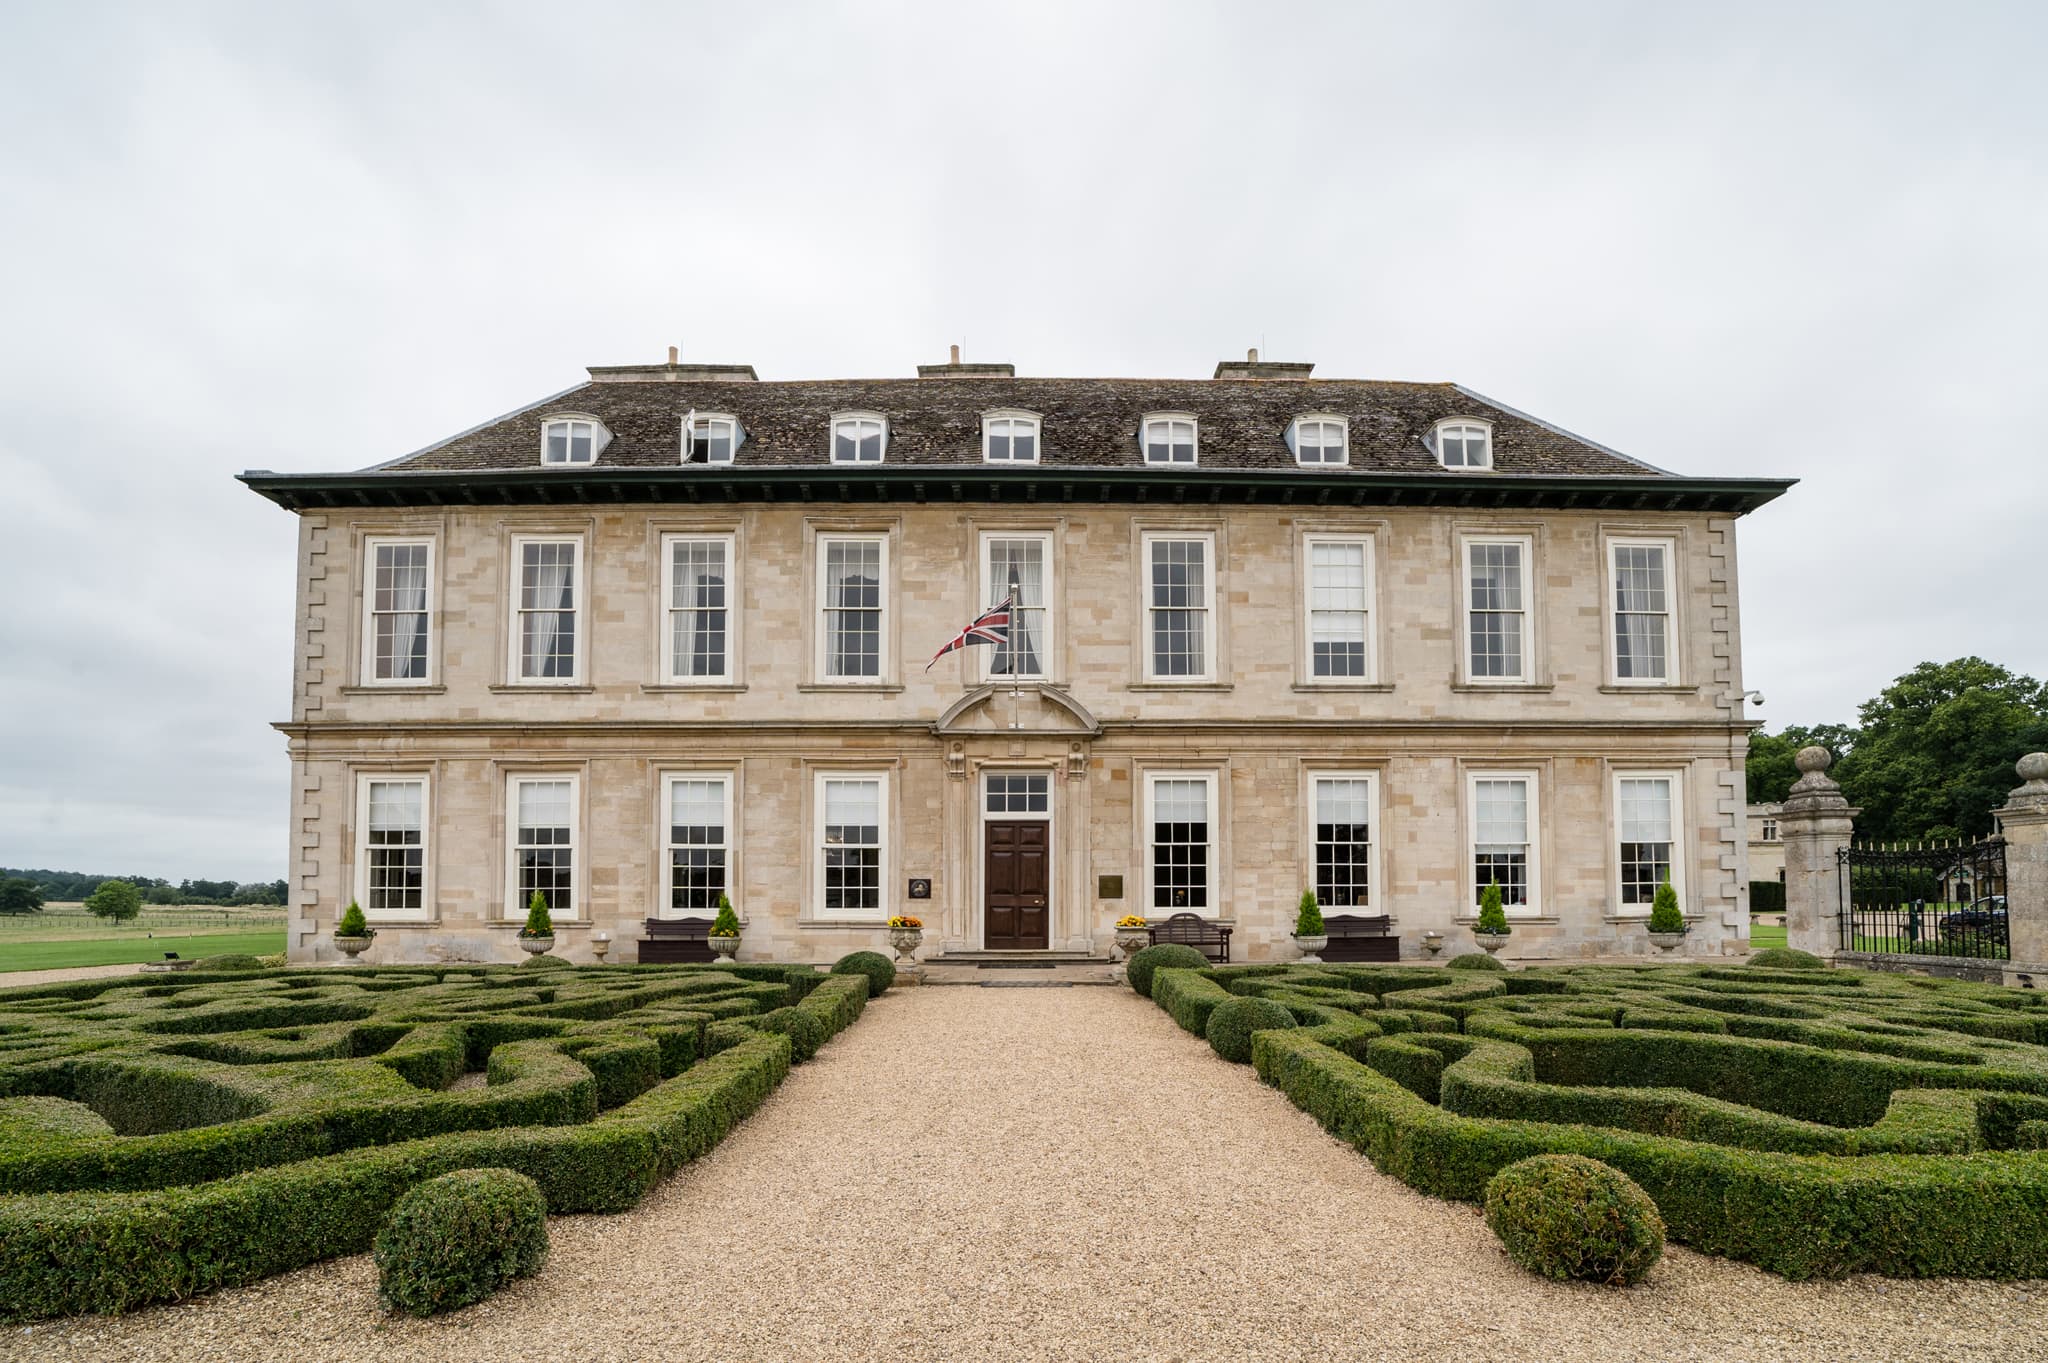 The front entrance of Stapleford Park hotel